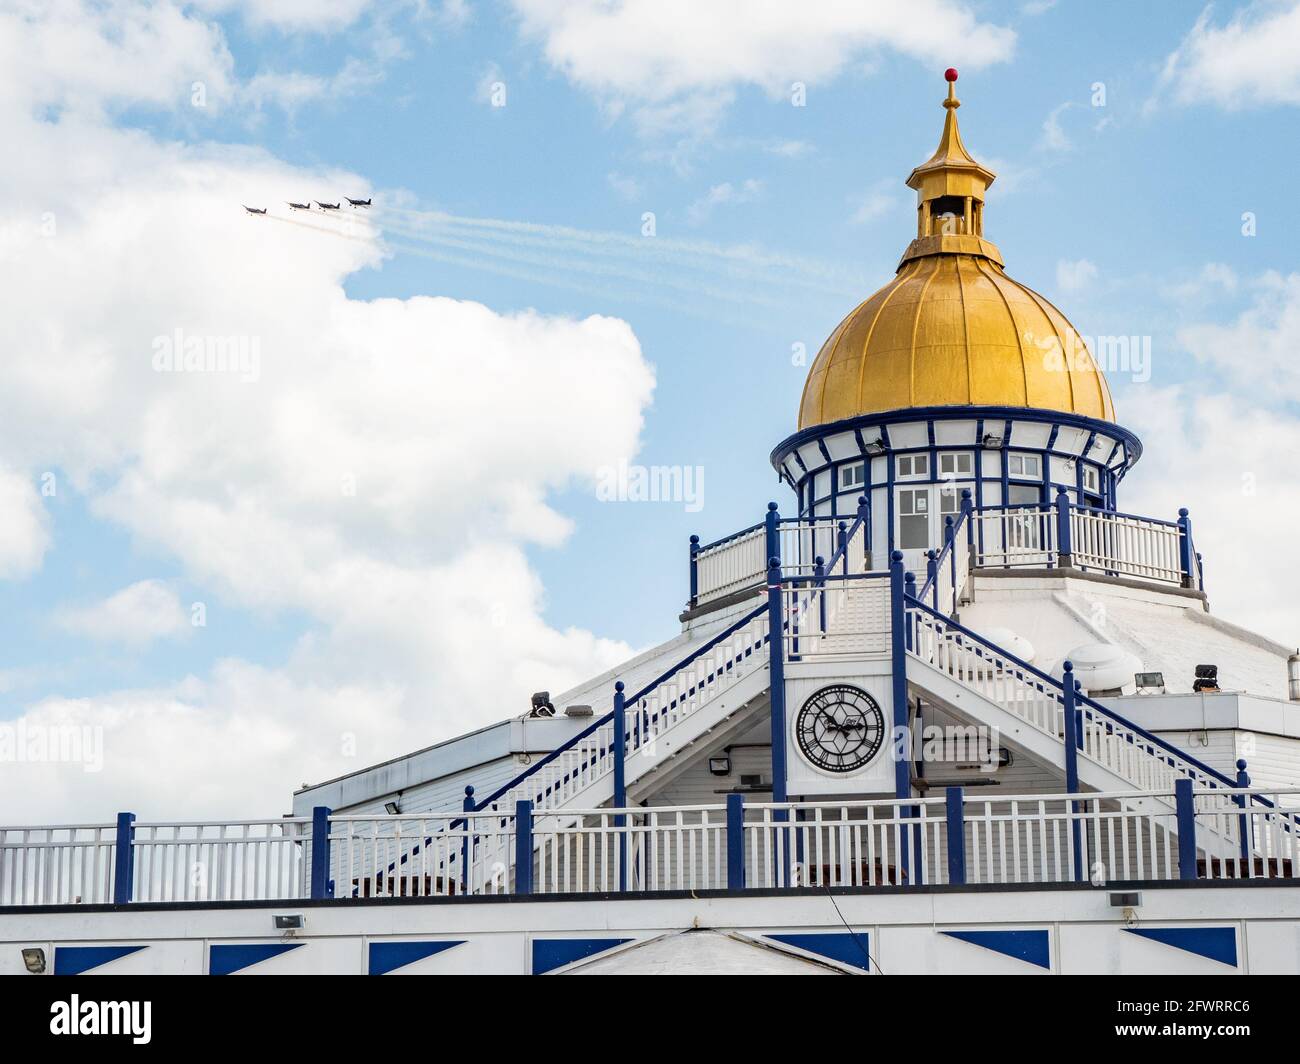 Airbourne Airshow, Eastbourne, England. A formation of vintage fighter planes passing over the dome of the pier at the popular English seaside resort. Stock Photo